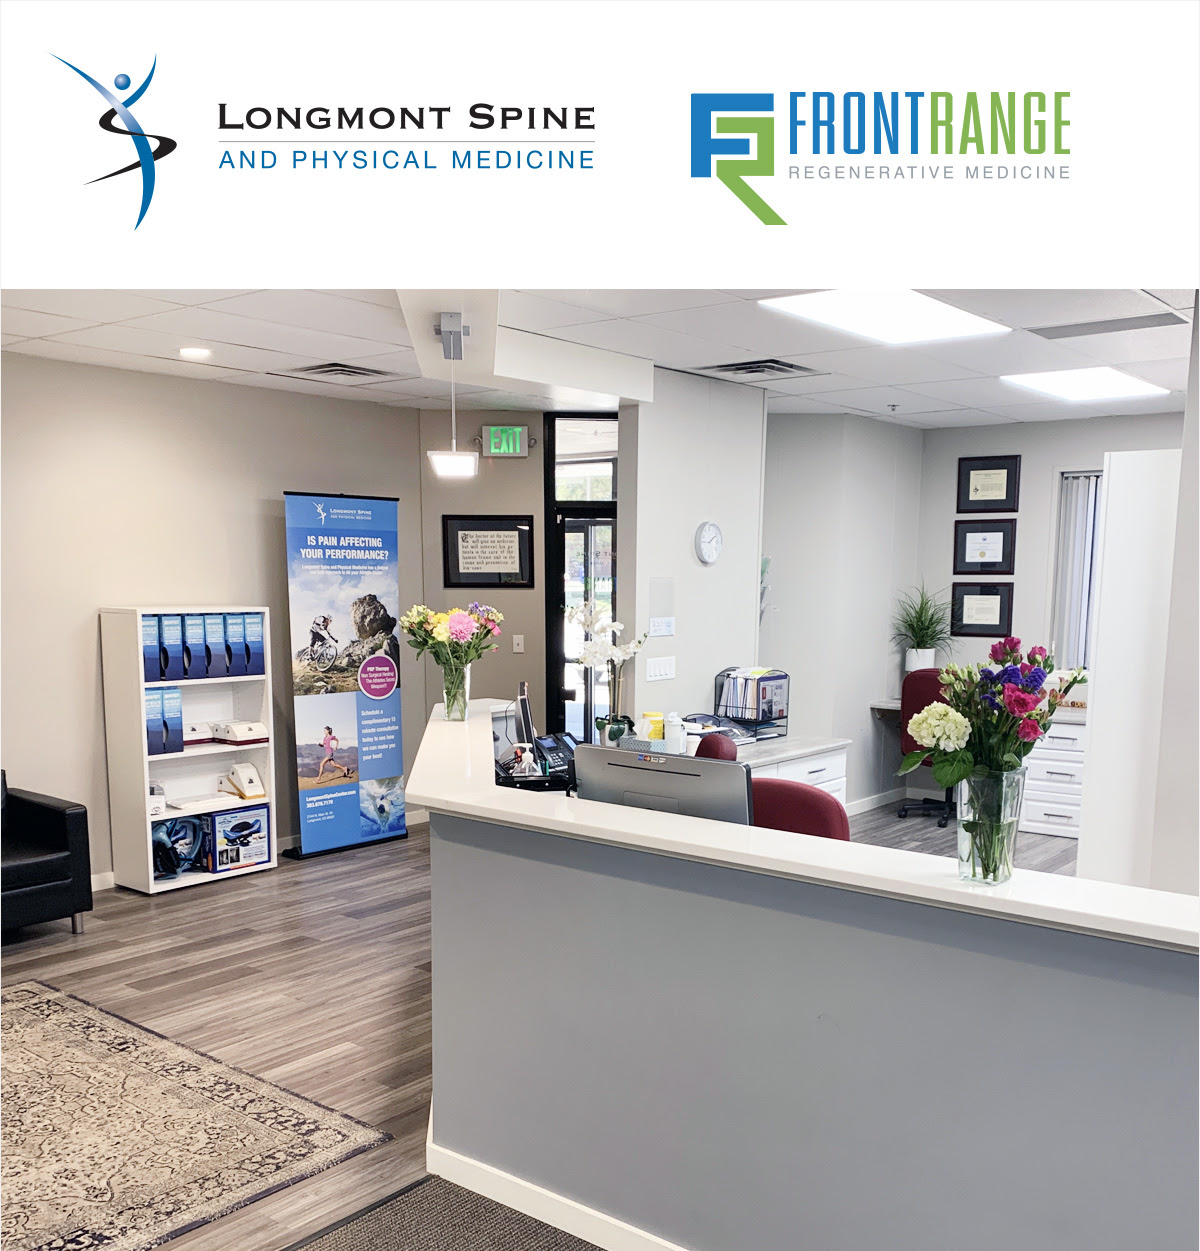 Longmont Spine and Physical Medicine